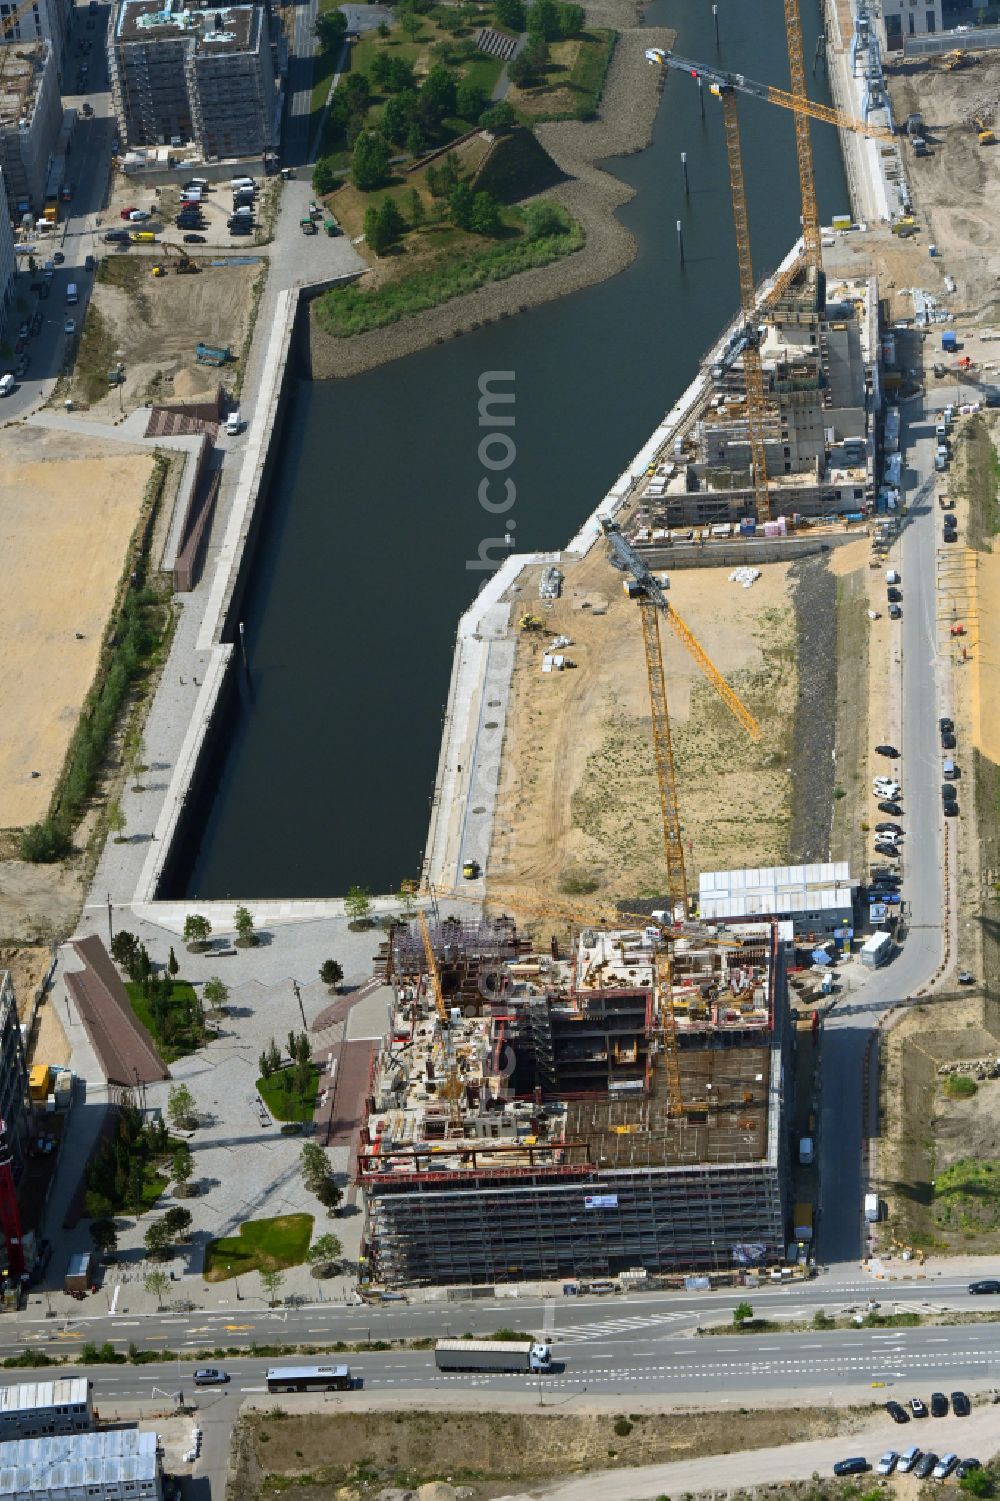 Aerial image Hamburg - Construction site to build a new office and commercial building of the EDGE HafenCity project on Amerigo-Vespucci-Platz in the district HafenCity in Hamburg, Germany